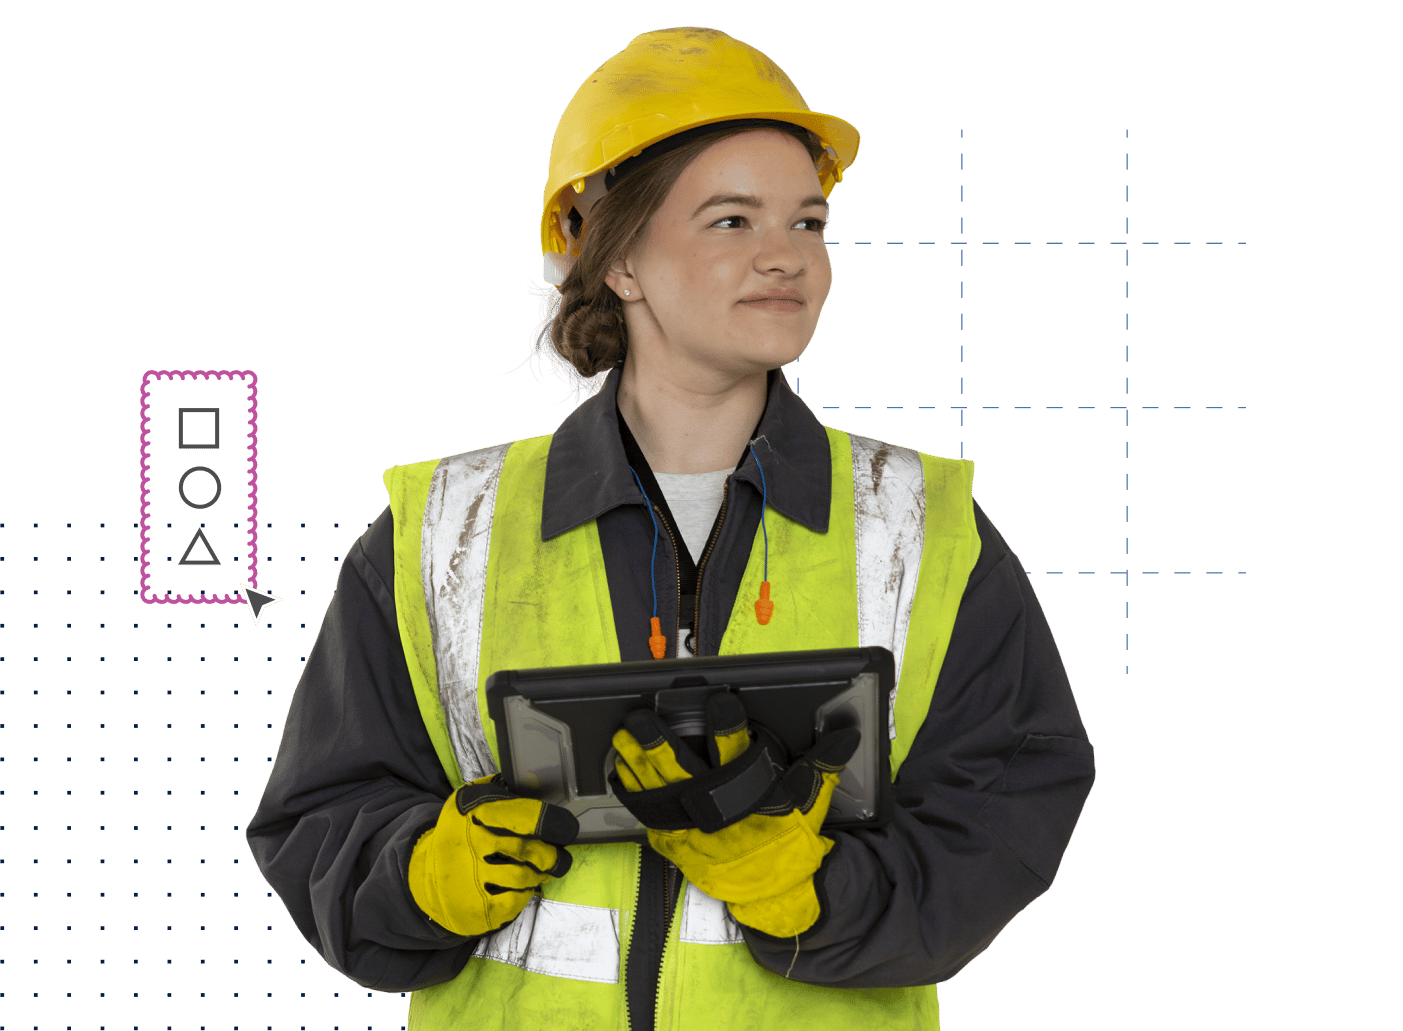 woman construction worker specialist contractor wearing vest, hard hat, gloves and holding a tablet